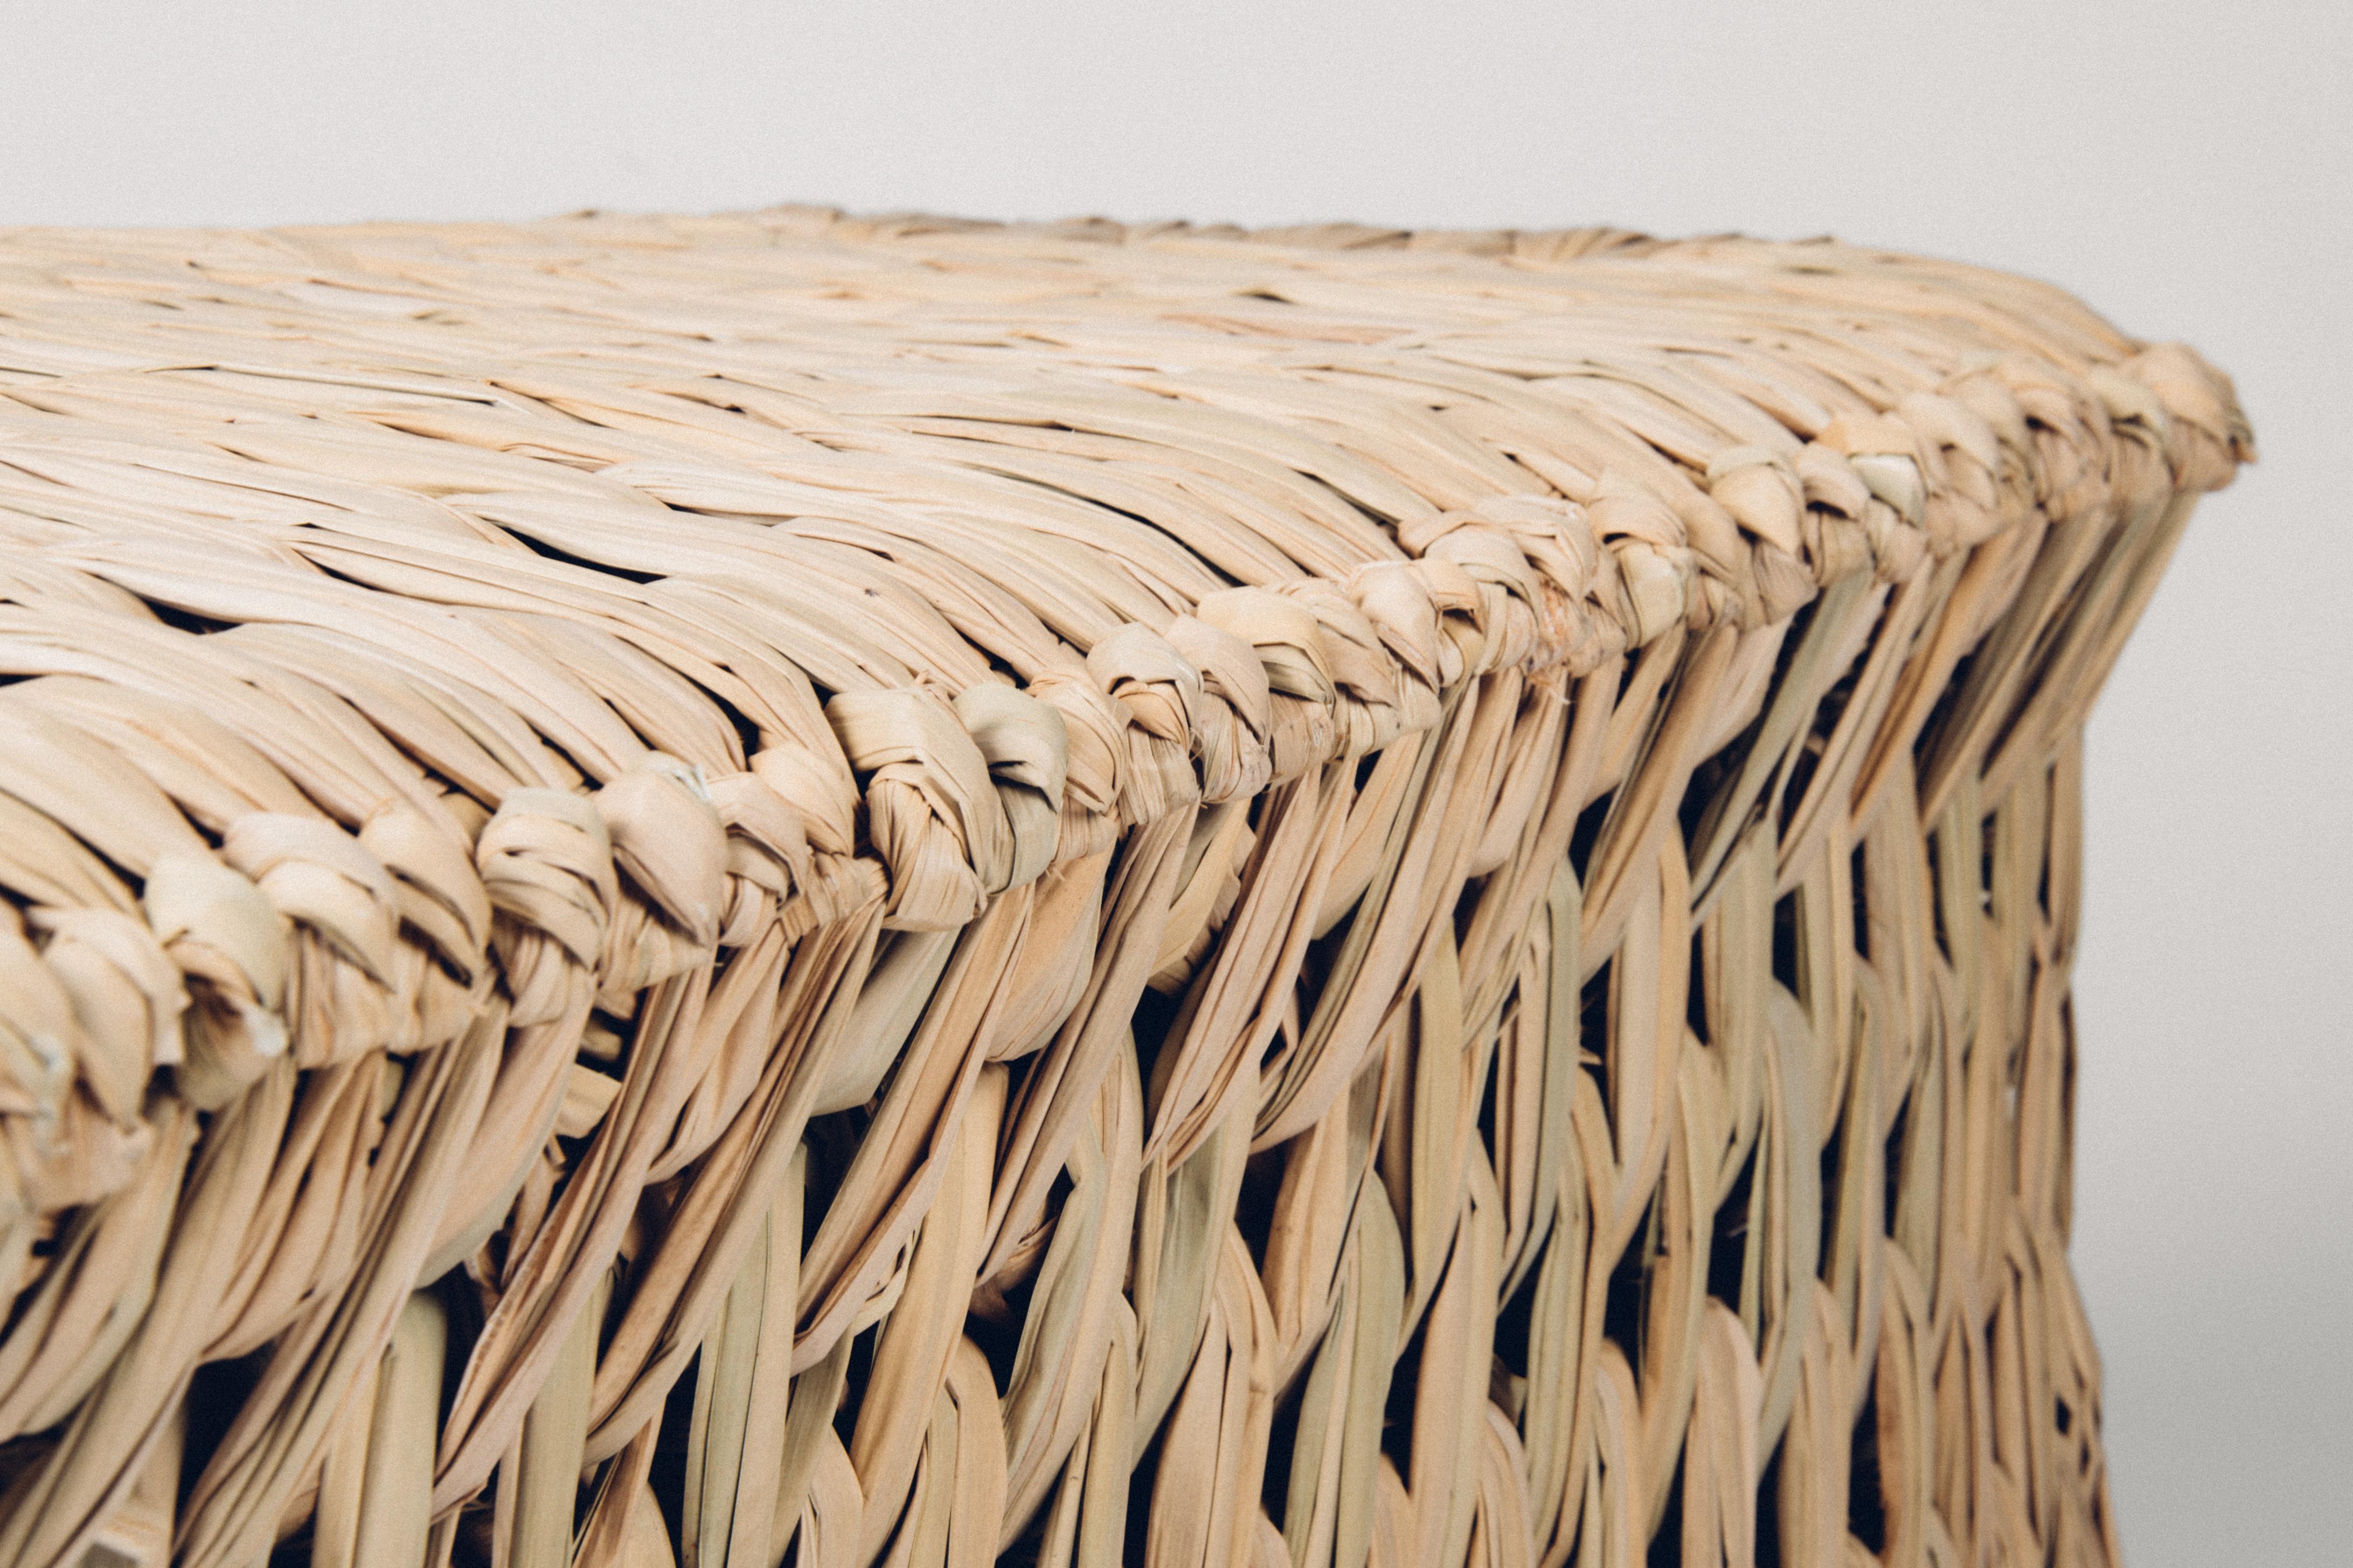 Woven Tule 'Icpalli' Bench made in Mexico from LUTECA im Zustand „Neu“ in New York, NY